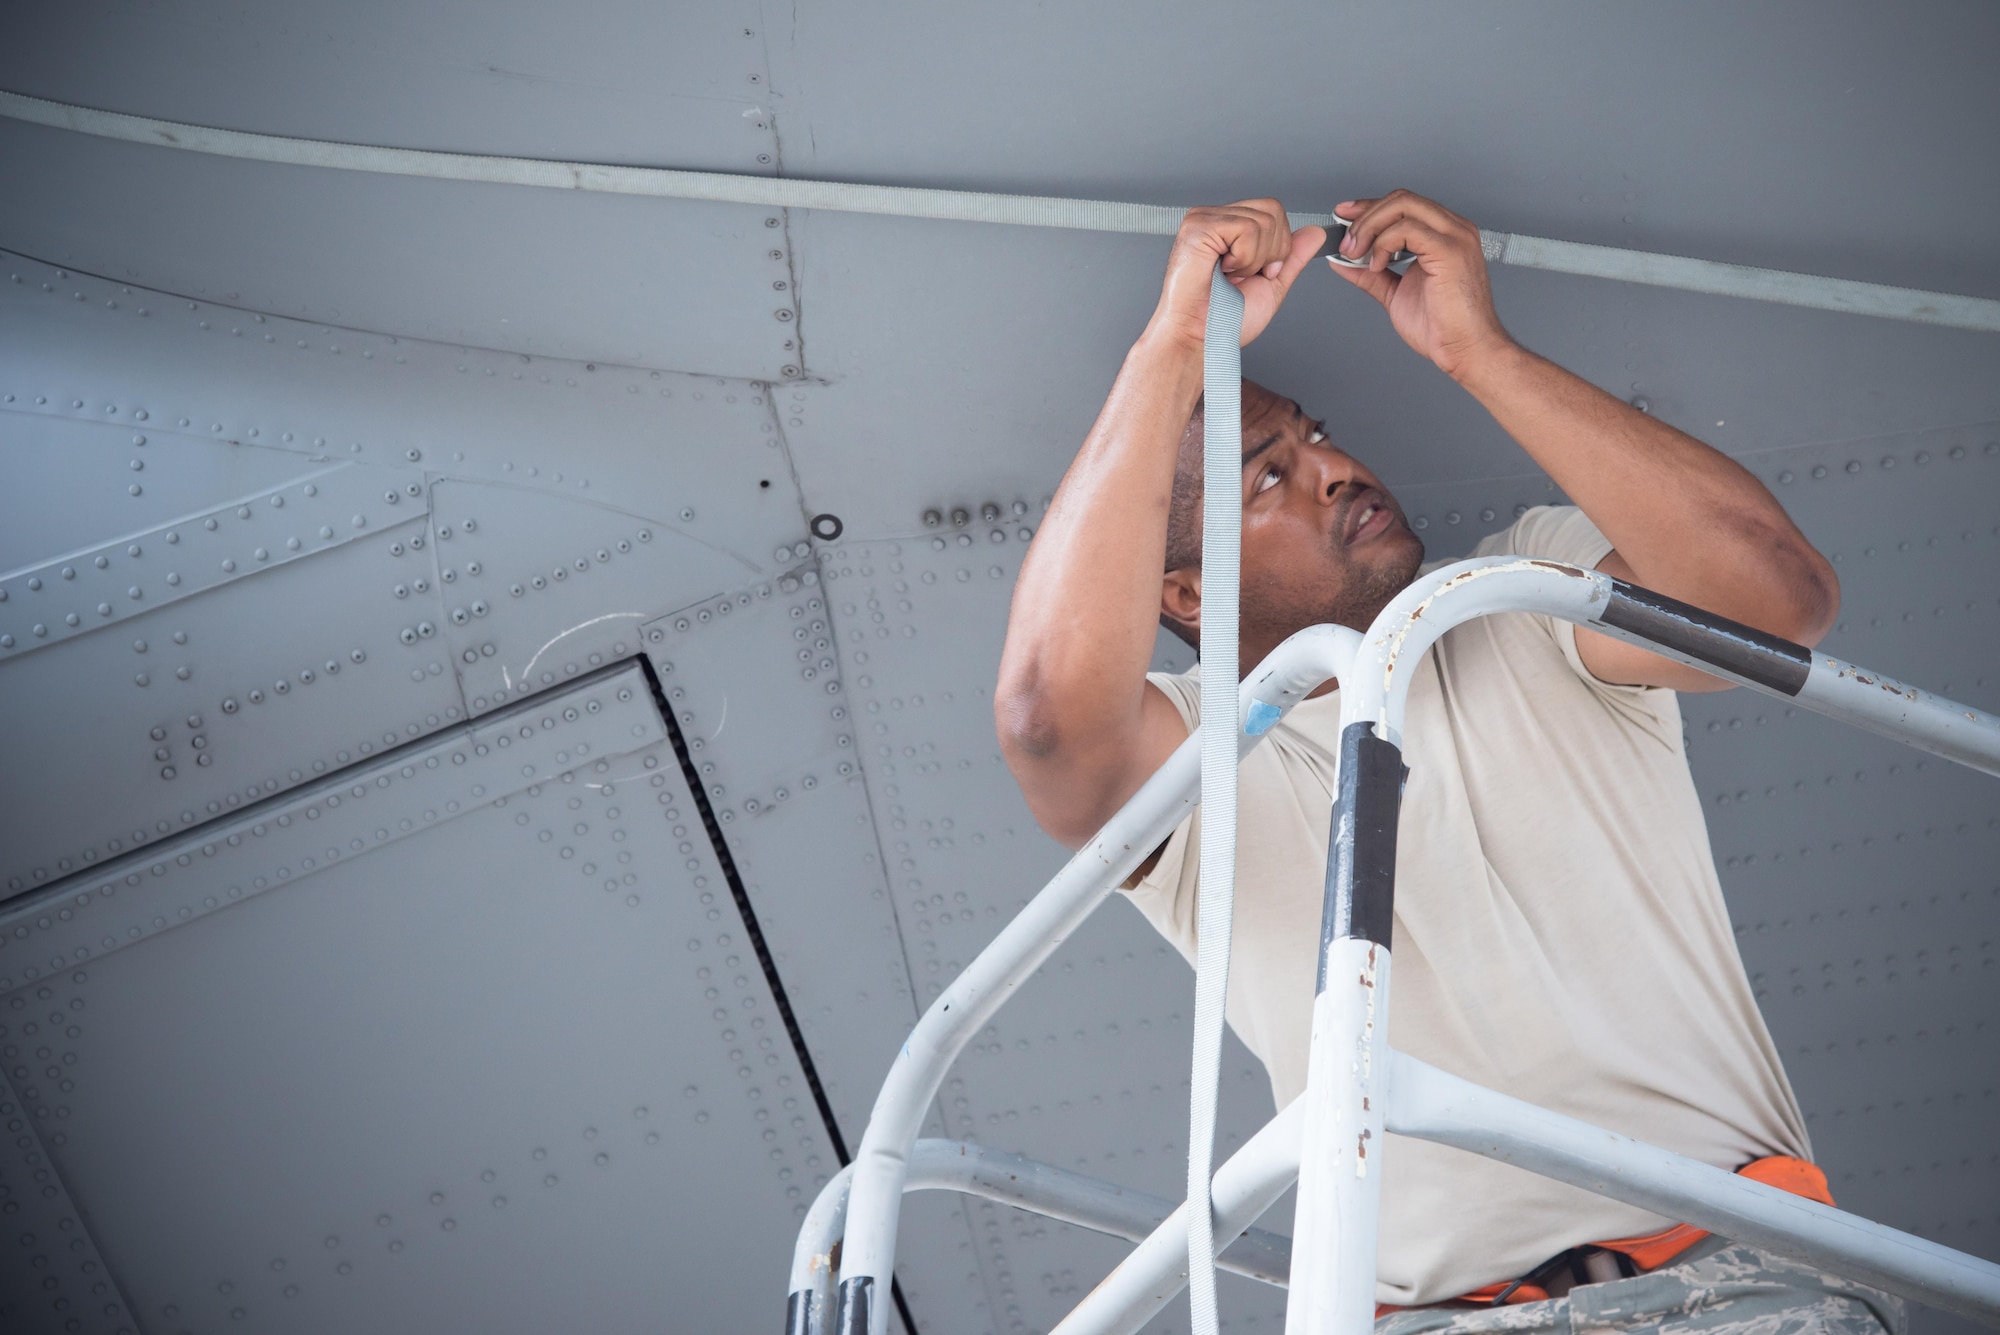 Senior Airman David Roby, 913th Maintenance Squadron crew chief from Little Rock Air Force Base, Arkansas, secures a tie down onto the wing of a C-130J Super Hercules aircraft July 21, 2017 at Keesler AFB, Mississippi. (U.S. Air Force photo/Staff Sgt. Heather Heiney)